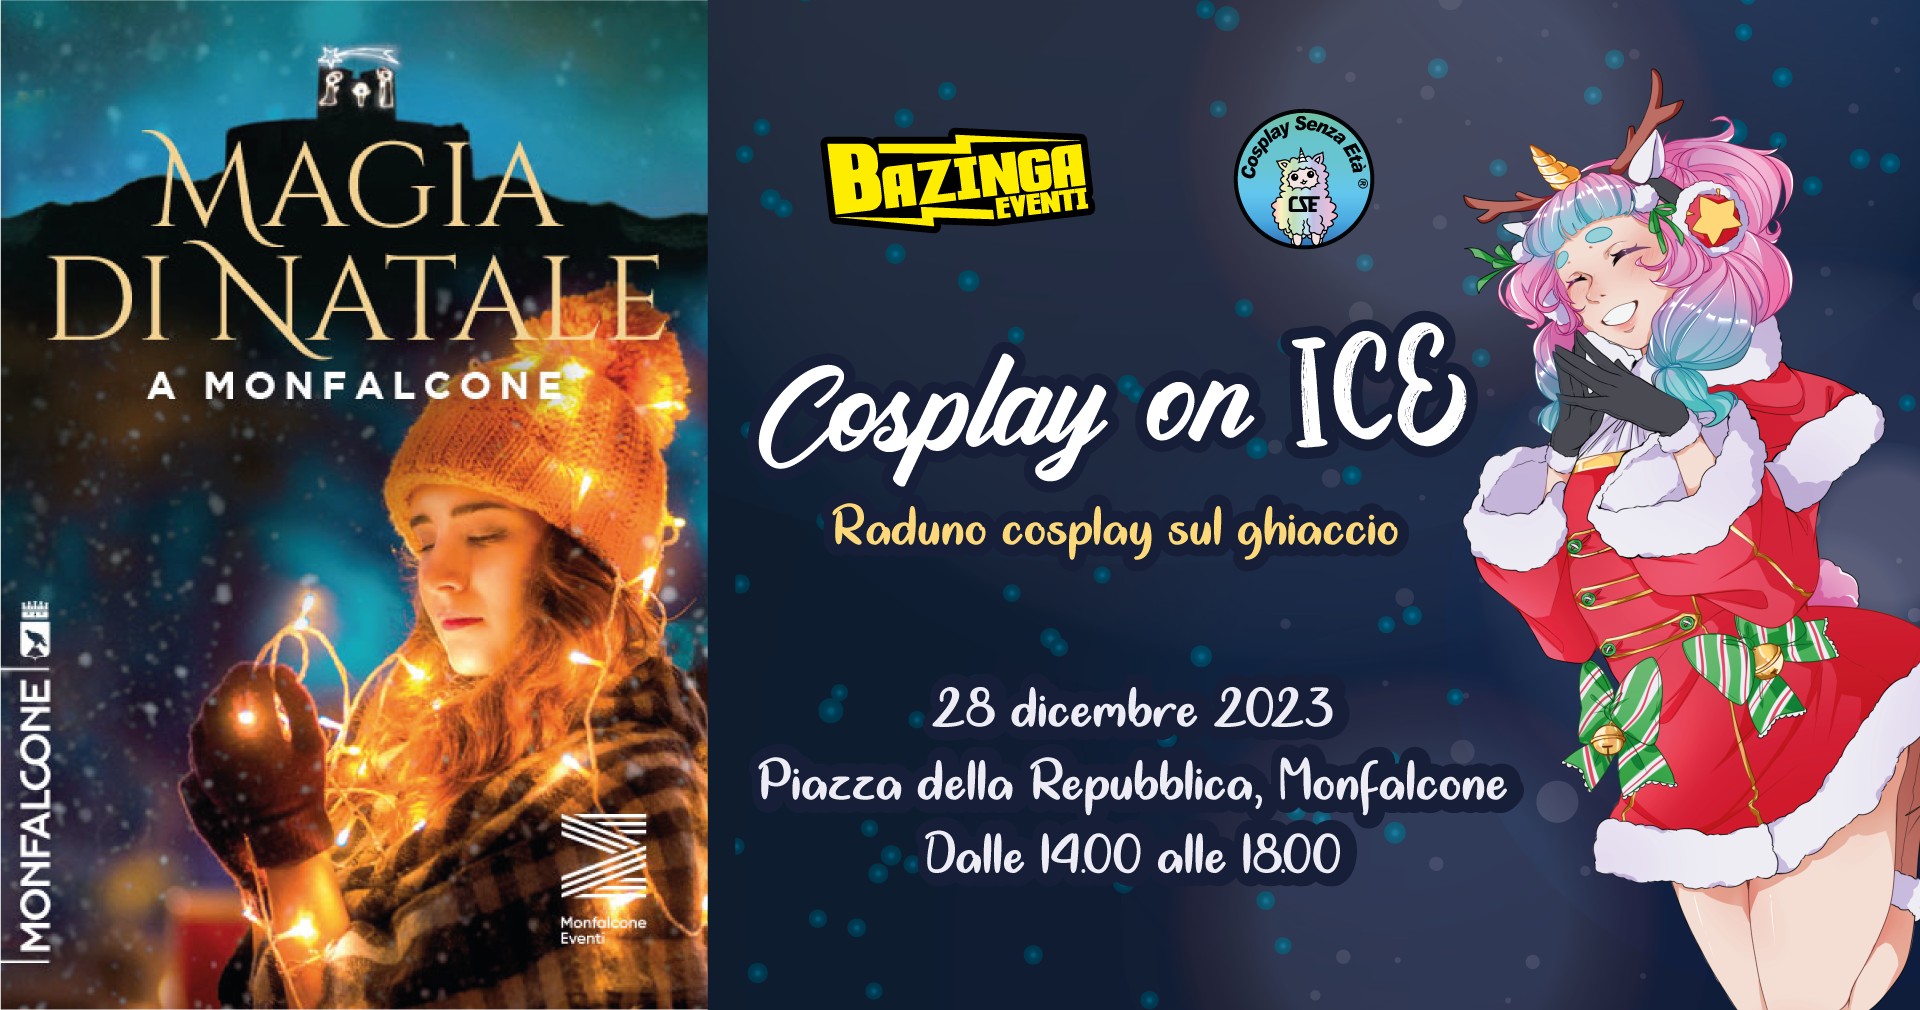 Magia di Natale a Monfalcone 2023: Cosplay on Ice